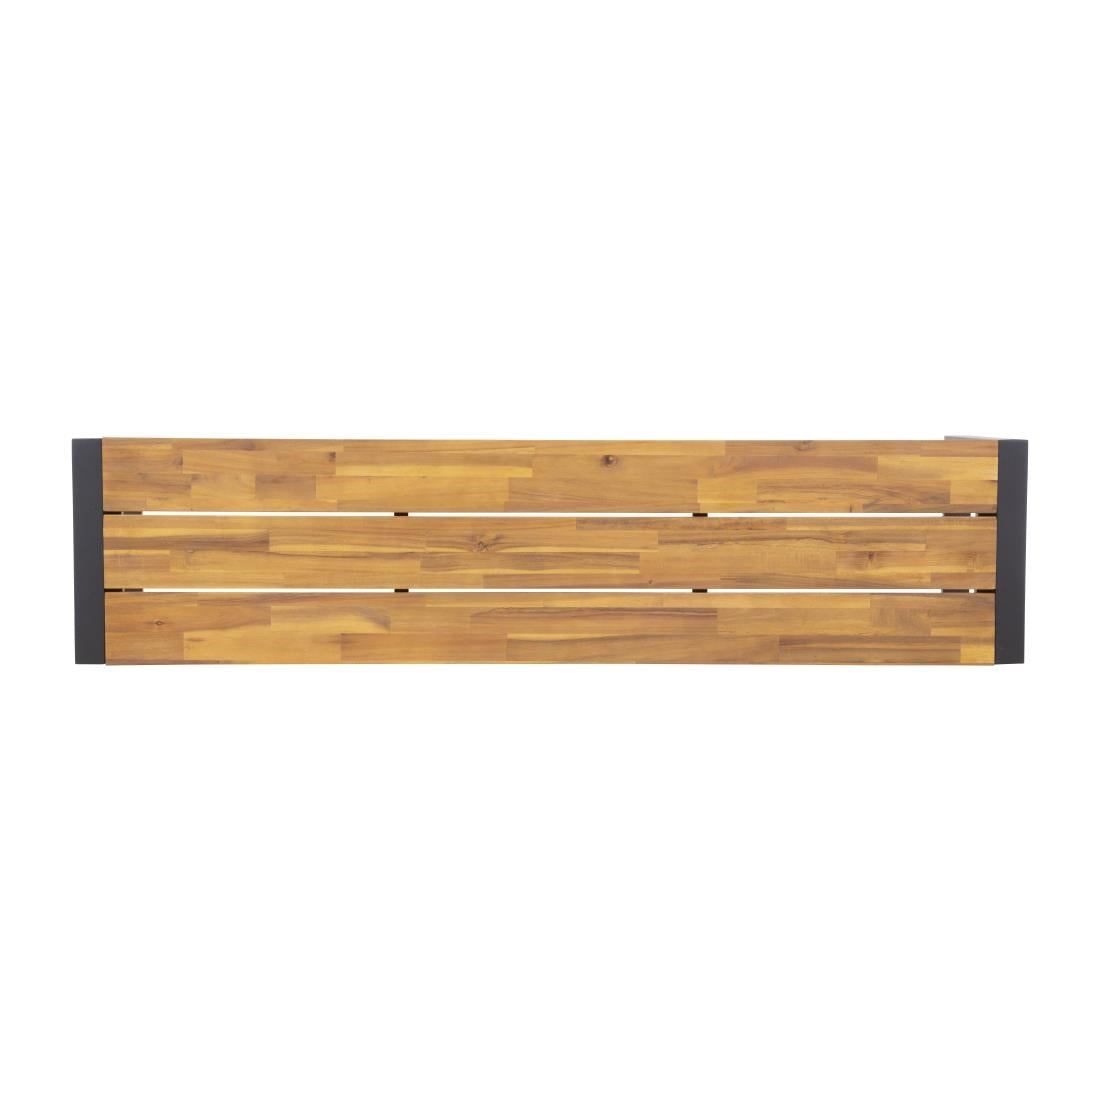 (Available 12/1/24) DS158 Bolero Acacia Wood and Steel Industrial Benches 1600mm (Pack of 2) JD Catering Equipment Solutions Ltd